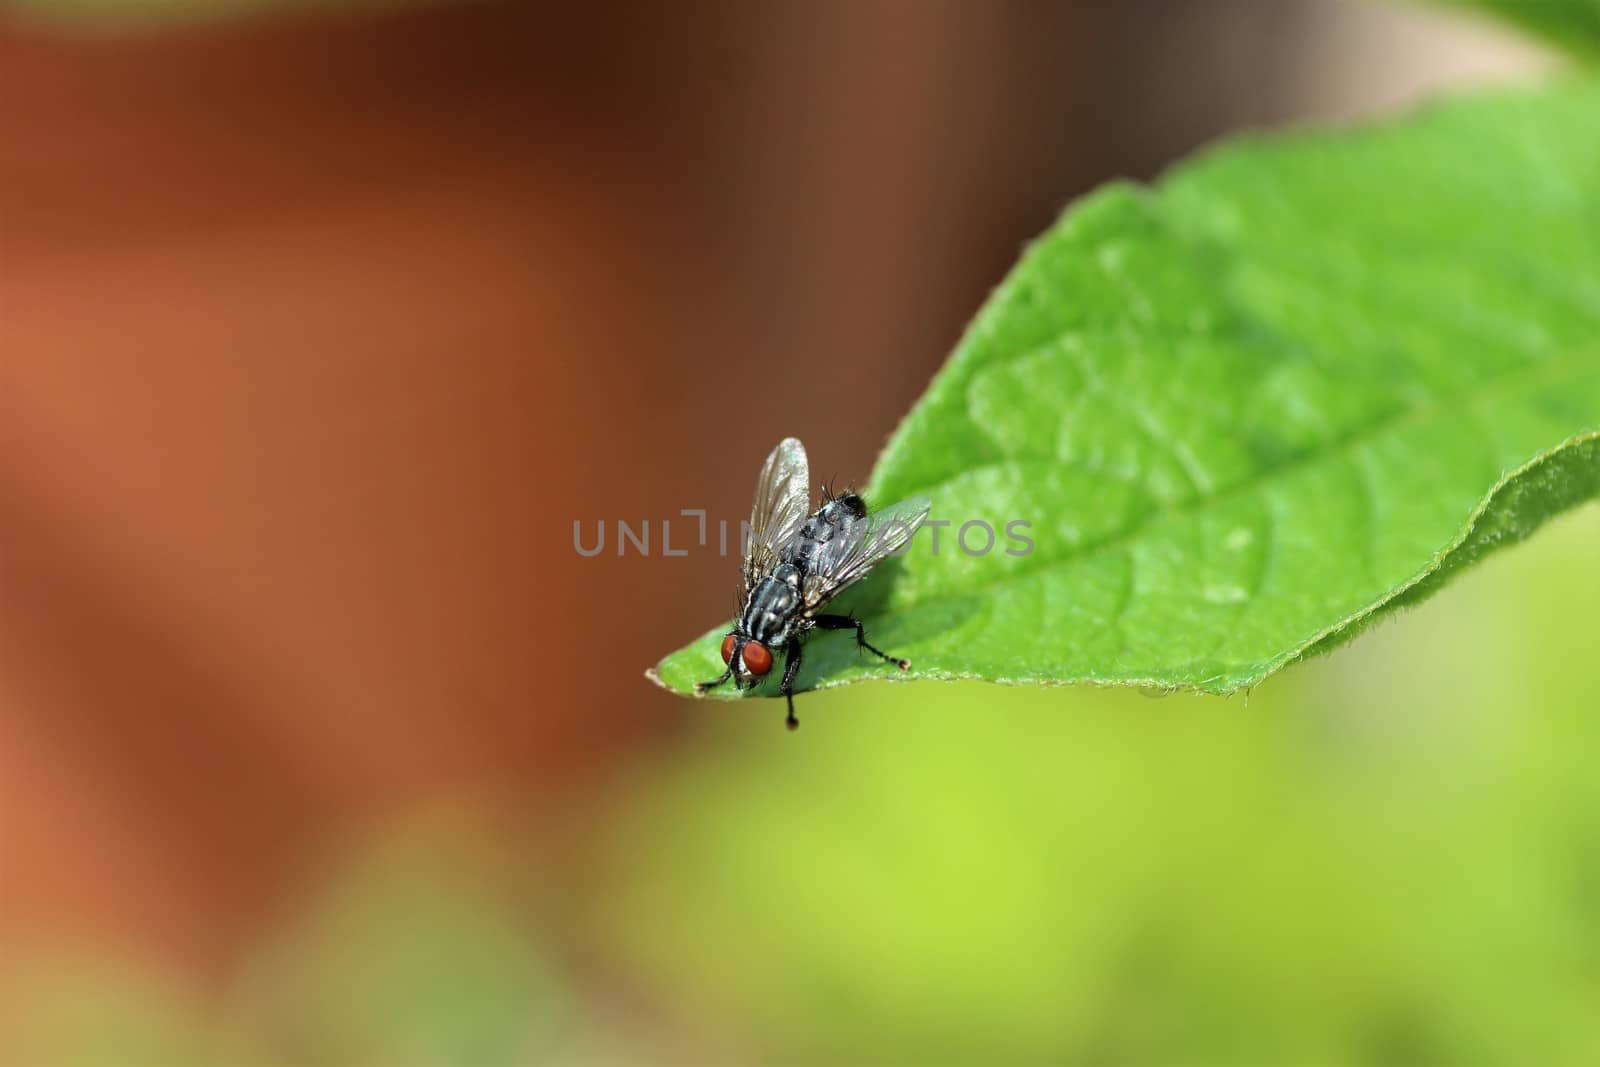 Close up of a fly on the green leafof a potato plant